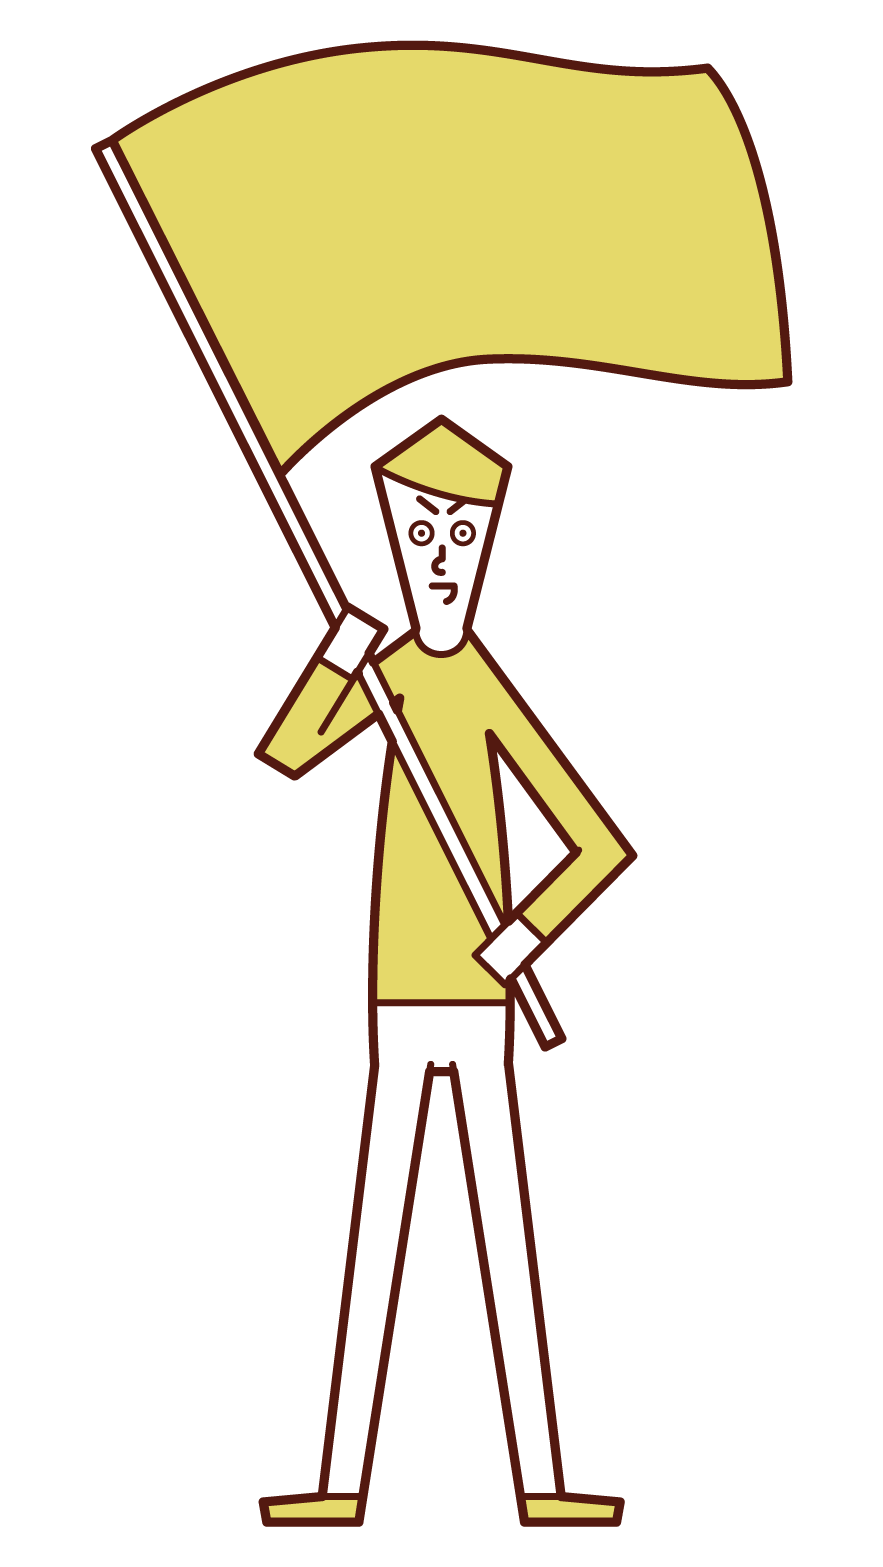 Illustration of a man waving a flag and cheering